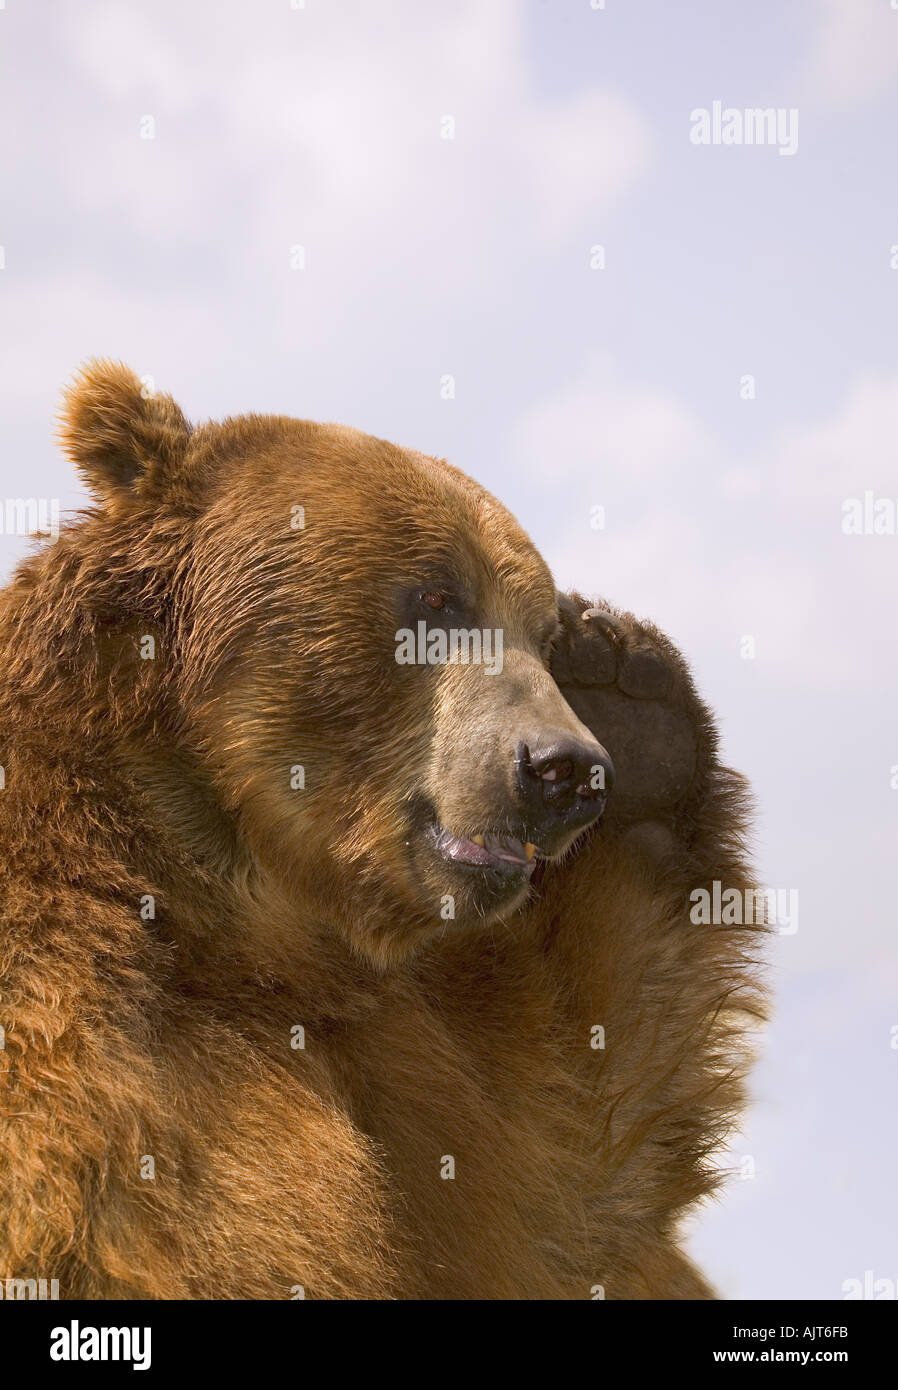 Bear with paw over eye Stock Photo